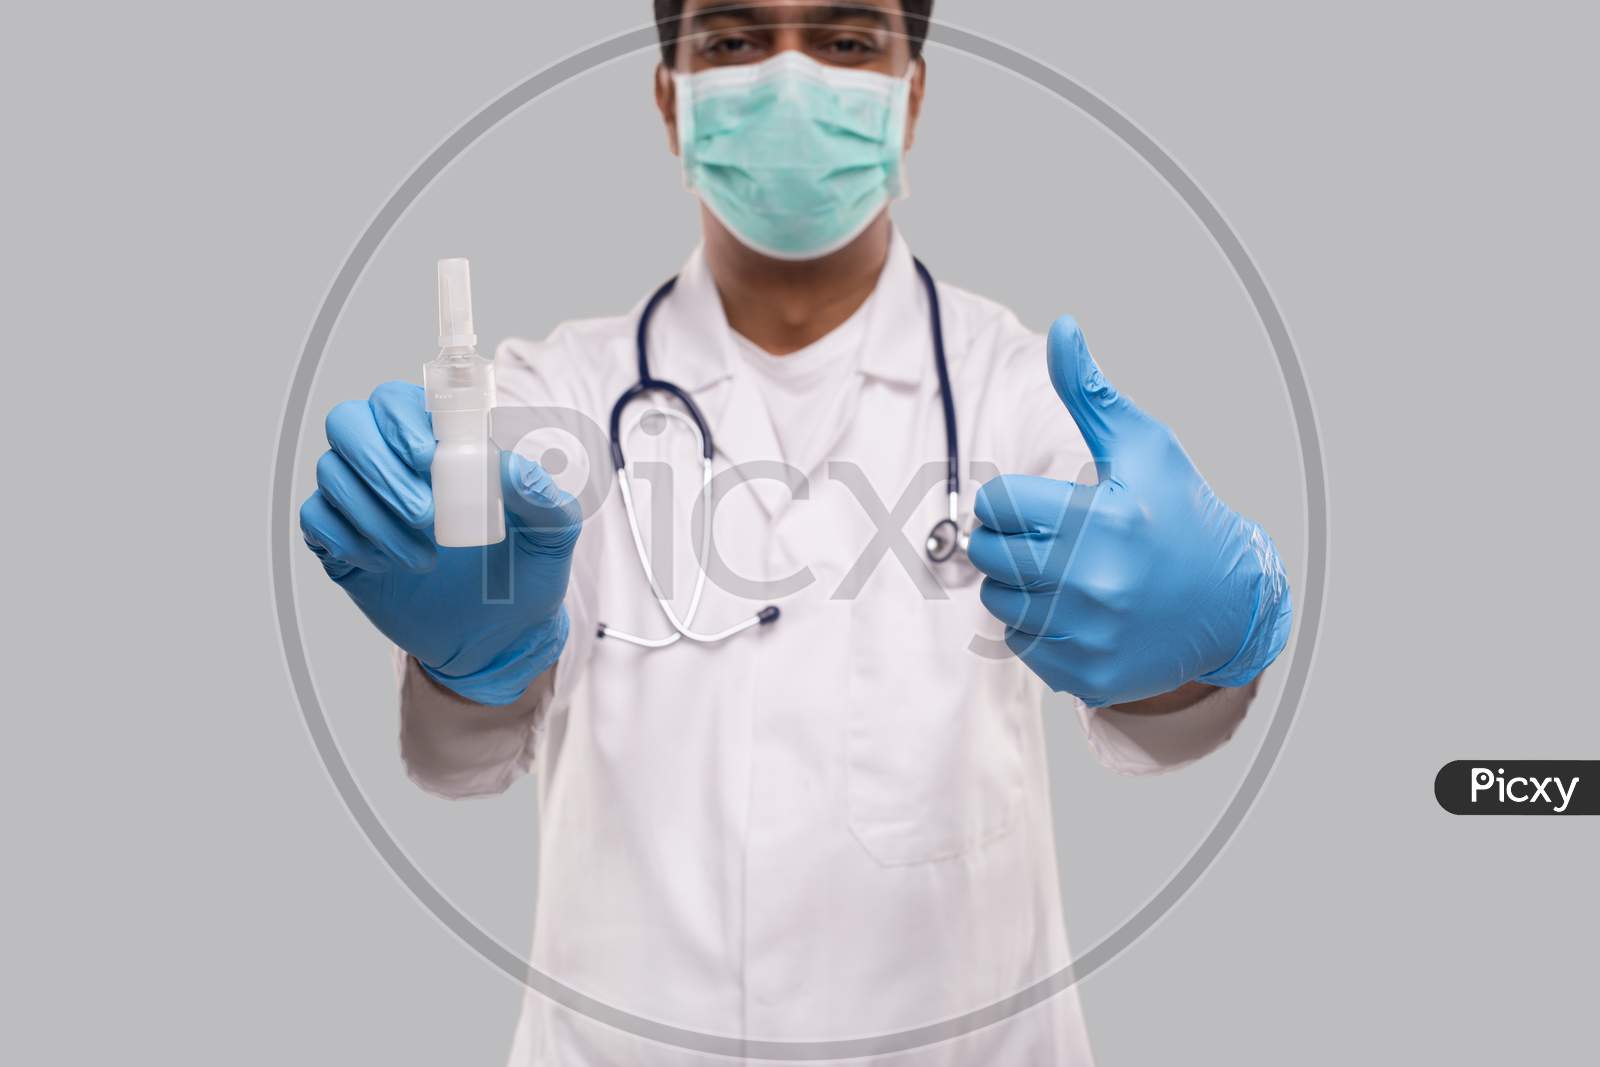 Doctor Showing Nose Spray And Thumb Up Wearing Medical Mask And Gloves Close Up. Indian Man Doctor Nasal Spray. Corona Virus Concept. Isolated